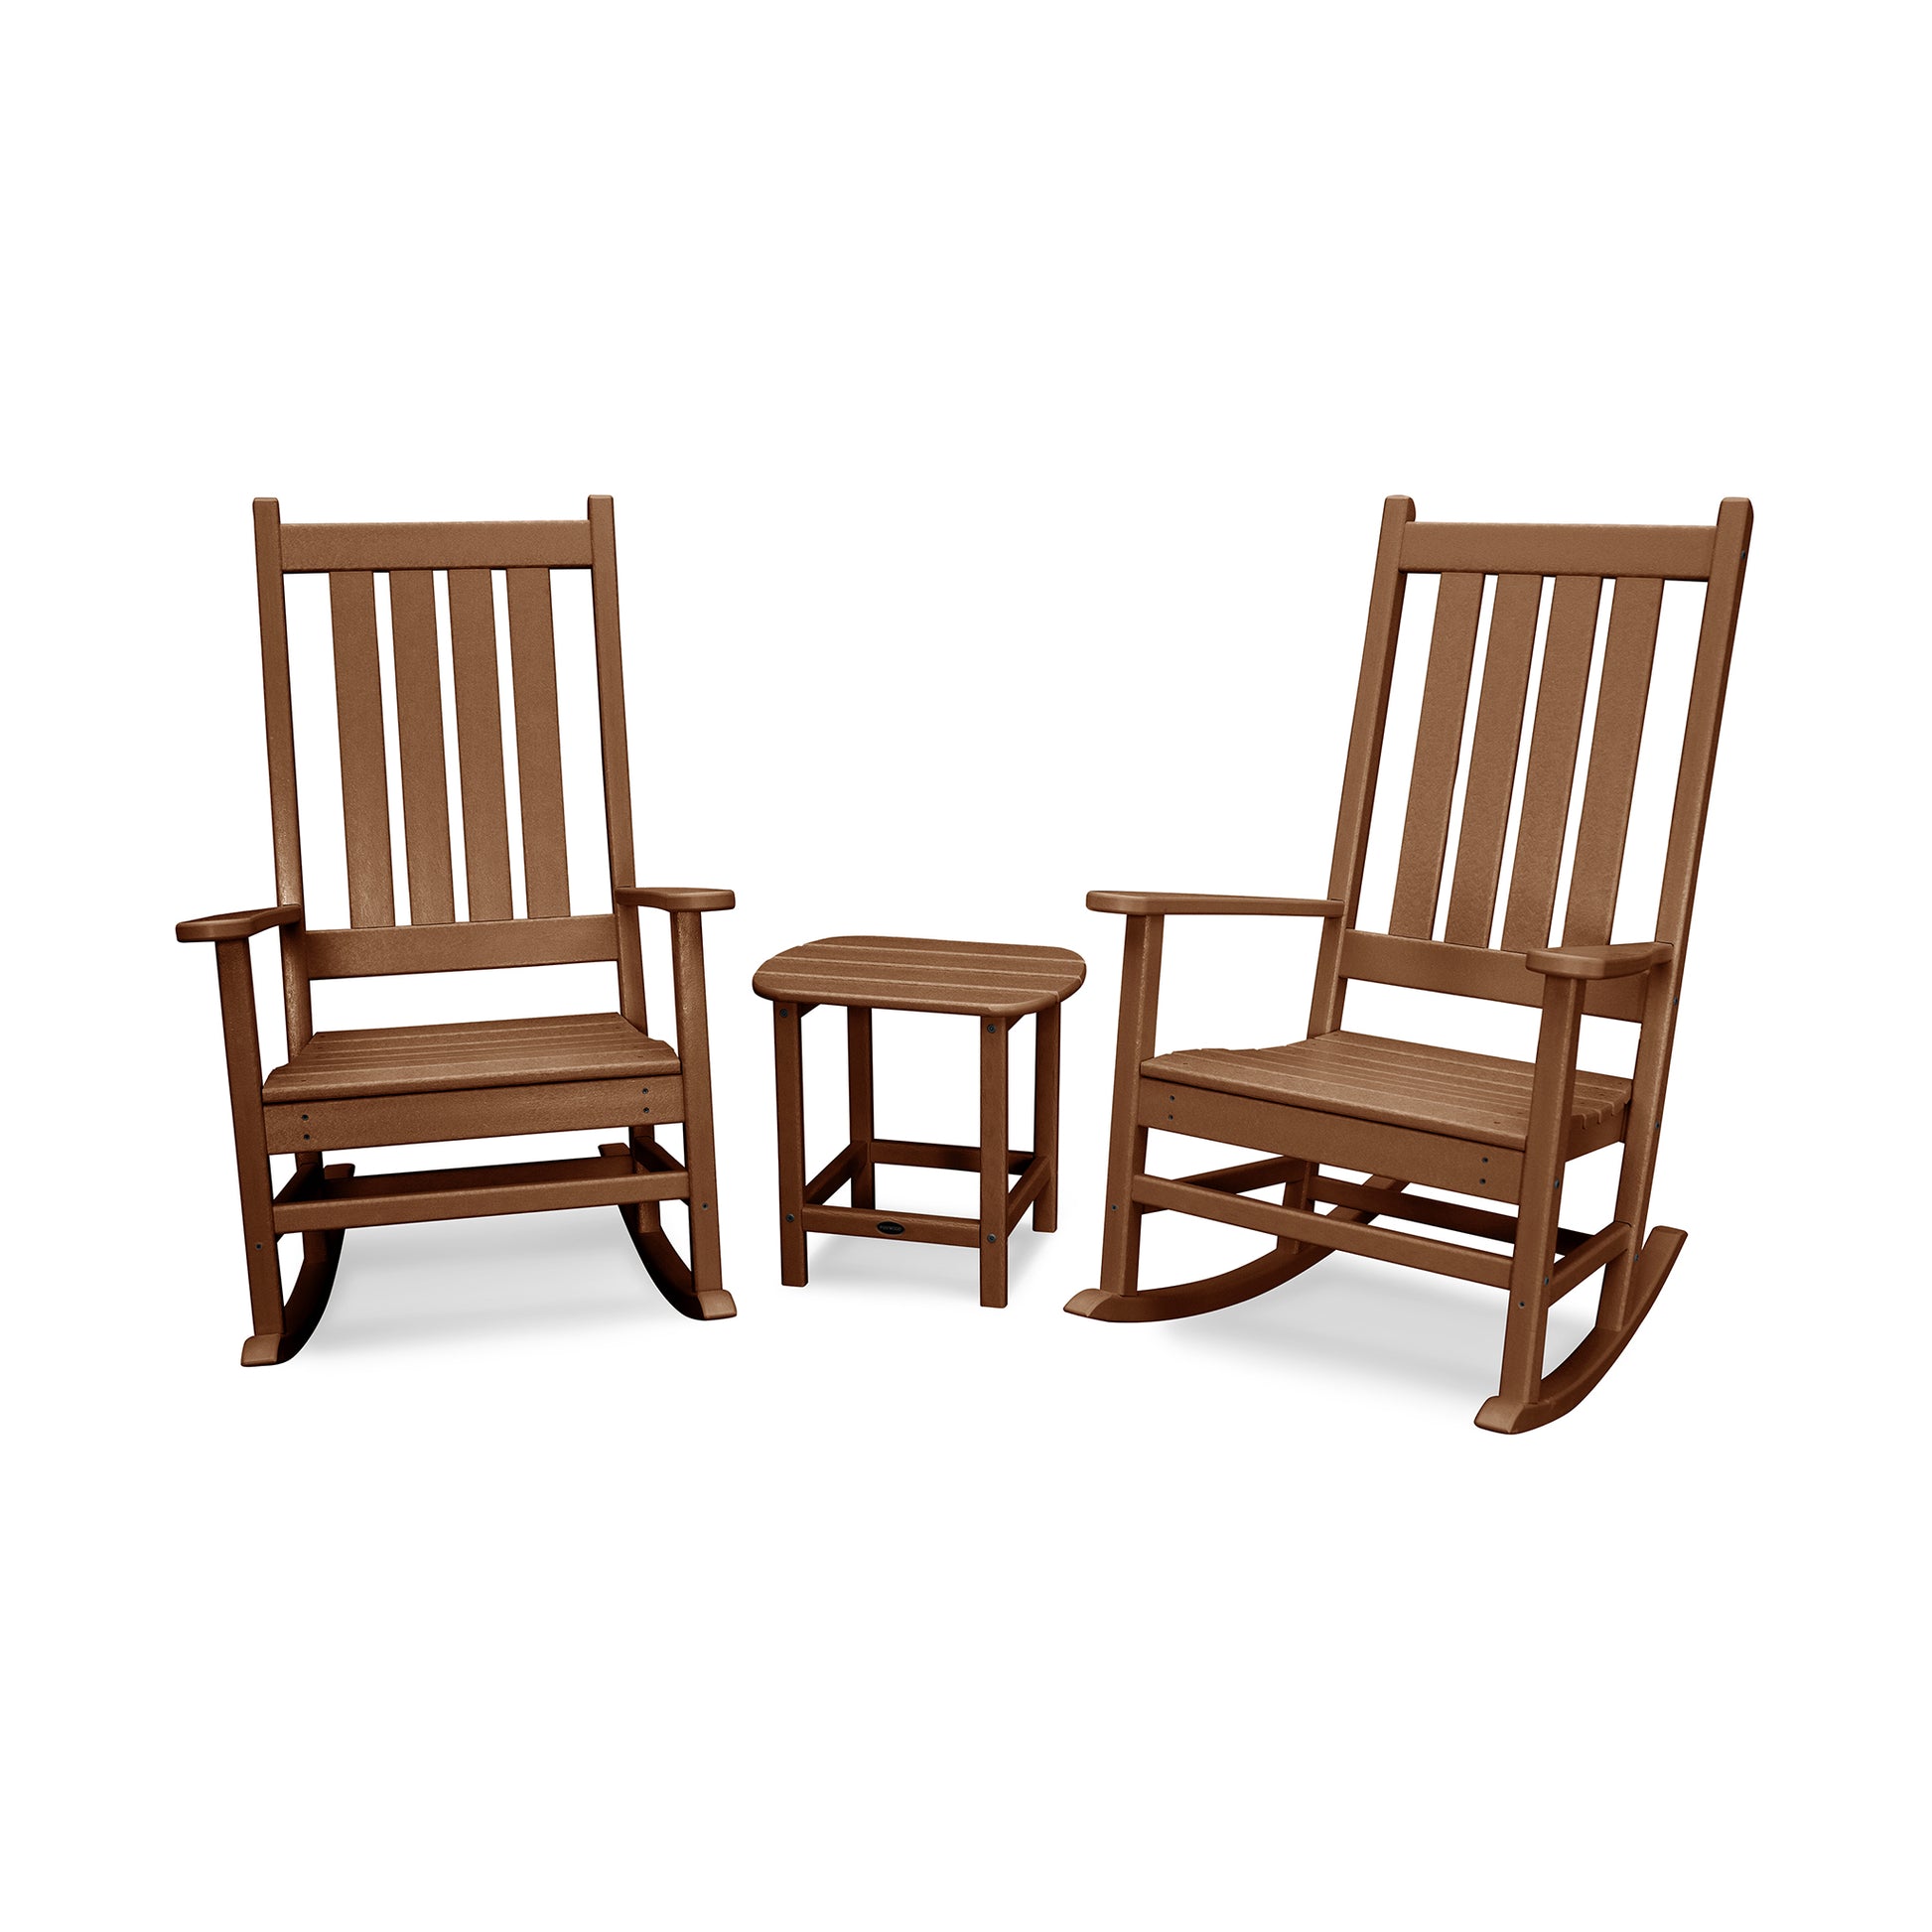 Two wooden rocking chairs and a matching small side table from the POLYWOOD Vineyard 3-Piece Rocking Set, set against a white background. The chairs have vertical slat backs and curved bases for rocking.